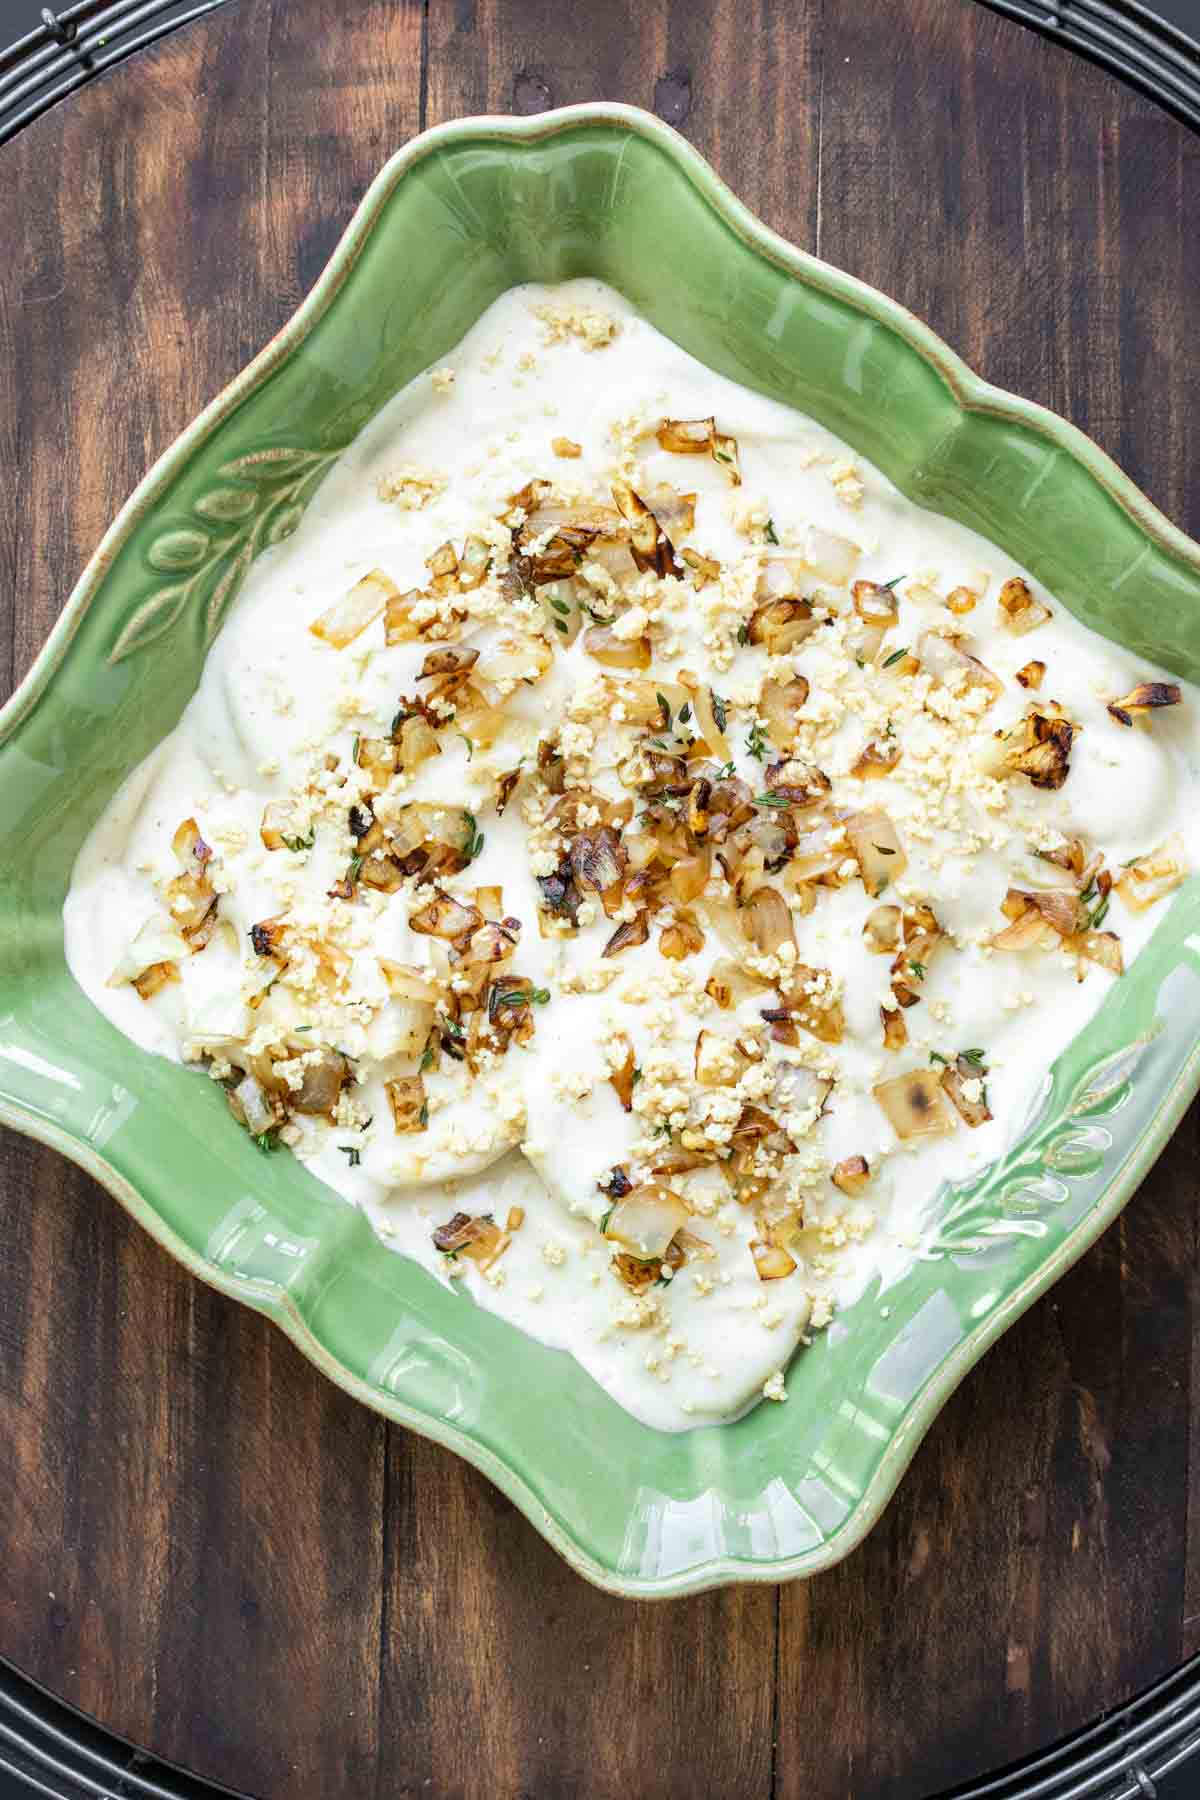 Green baking dish with creamy sauce topped with sautéed onions.